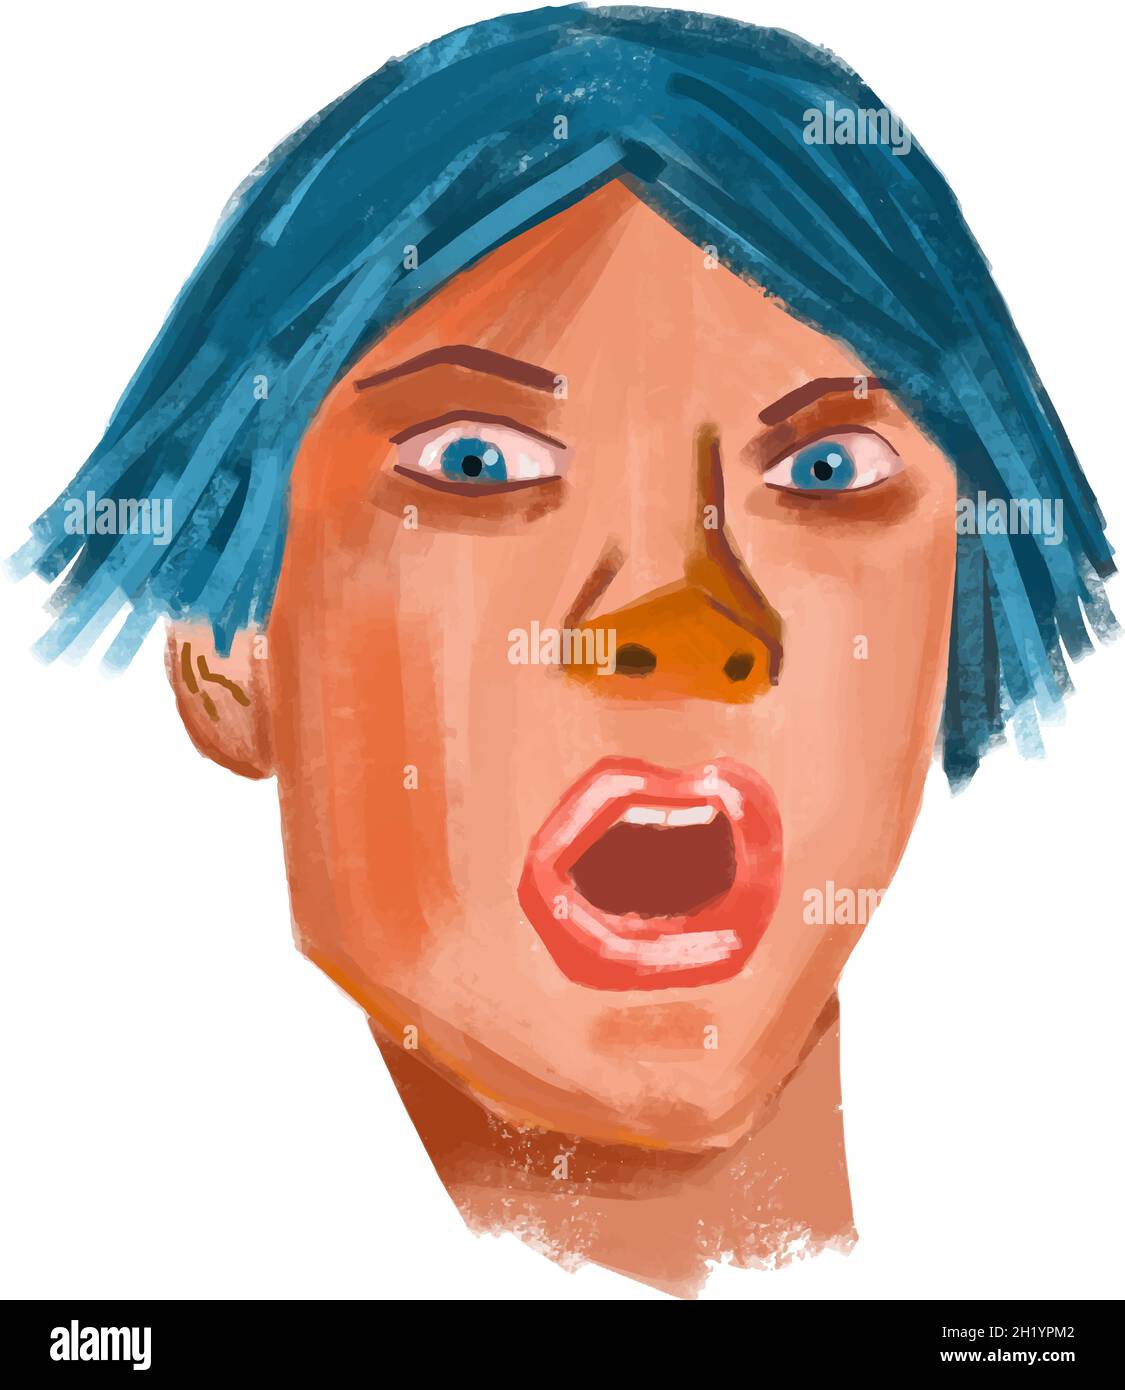 Surprised boy portrait with open mouth and blue hair Stock Vector